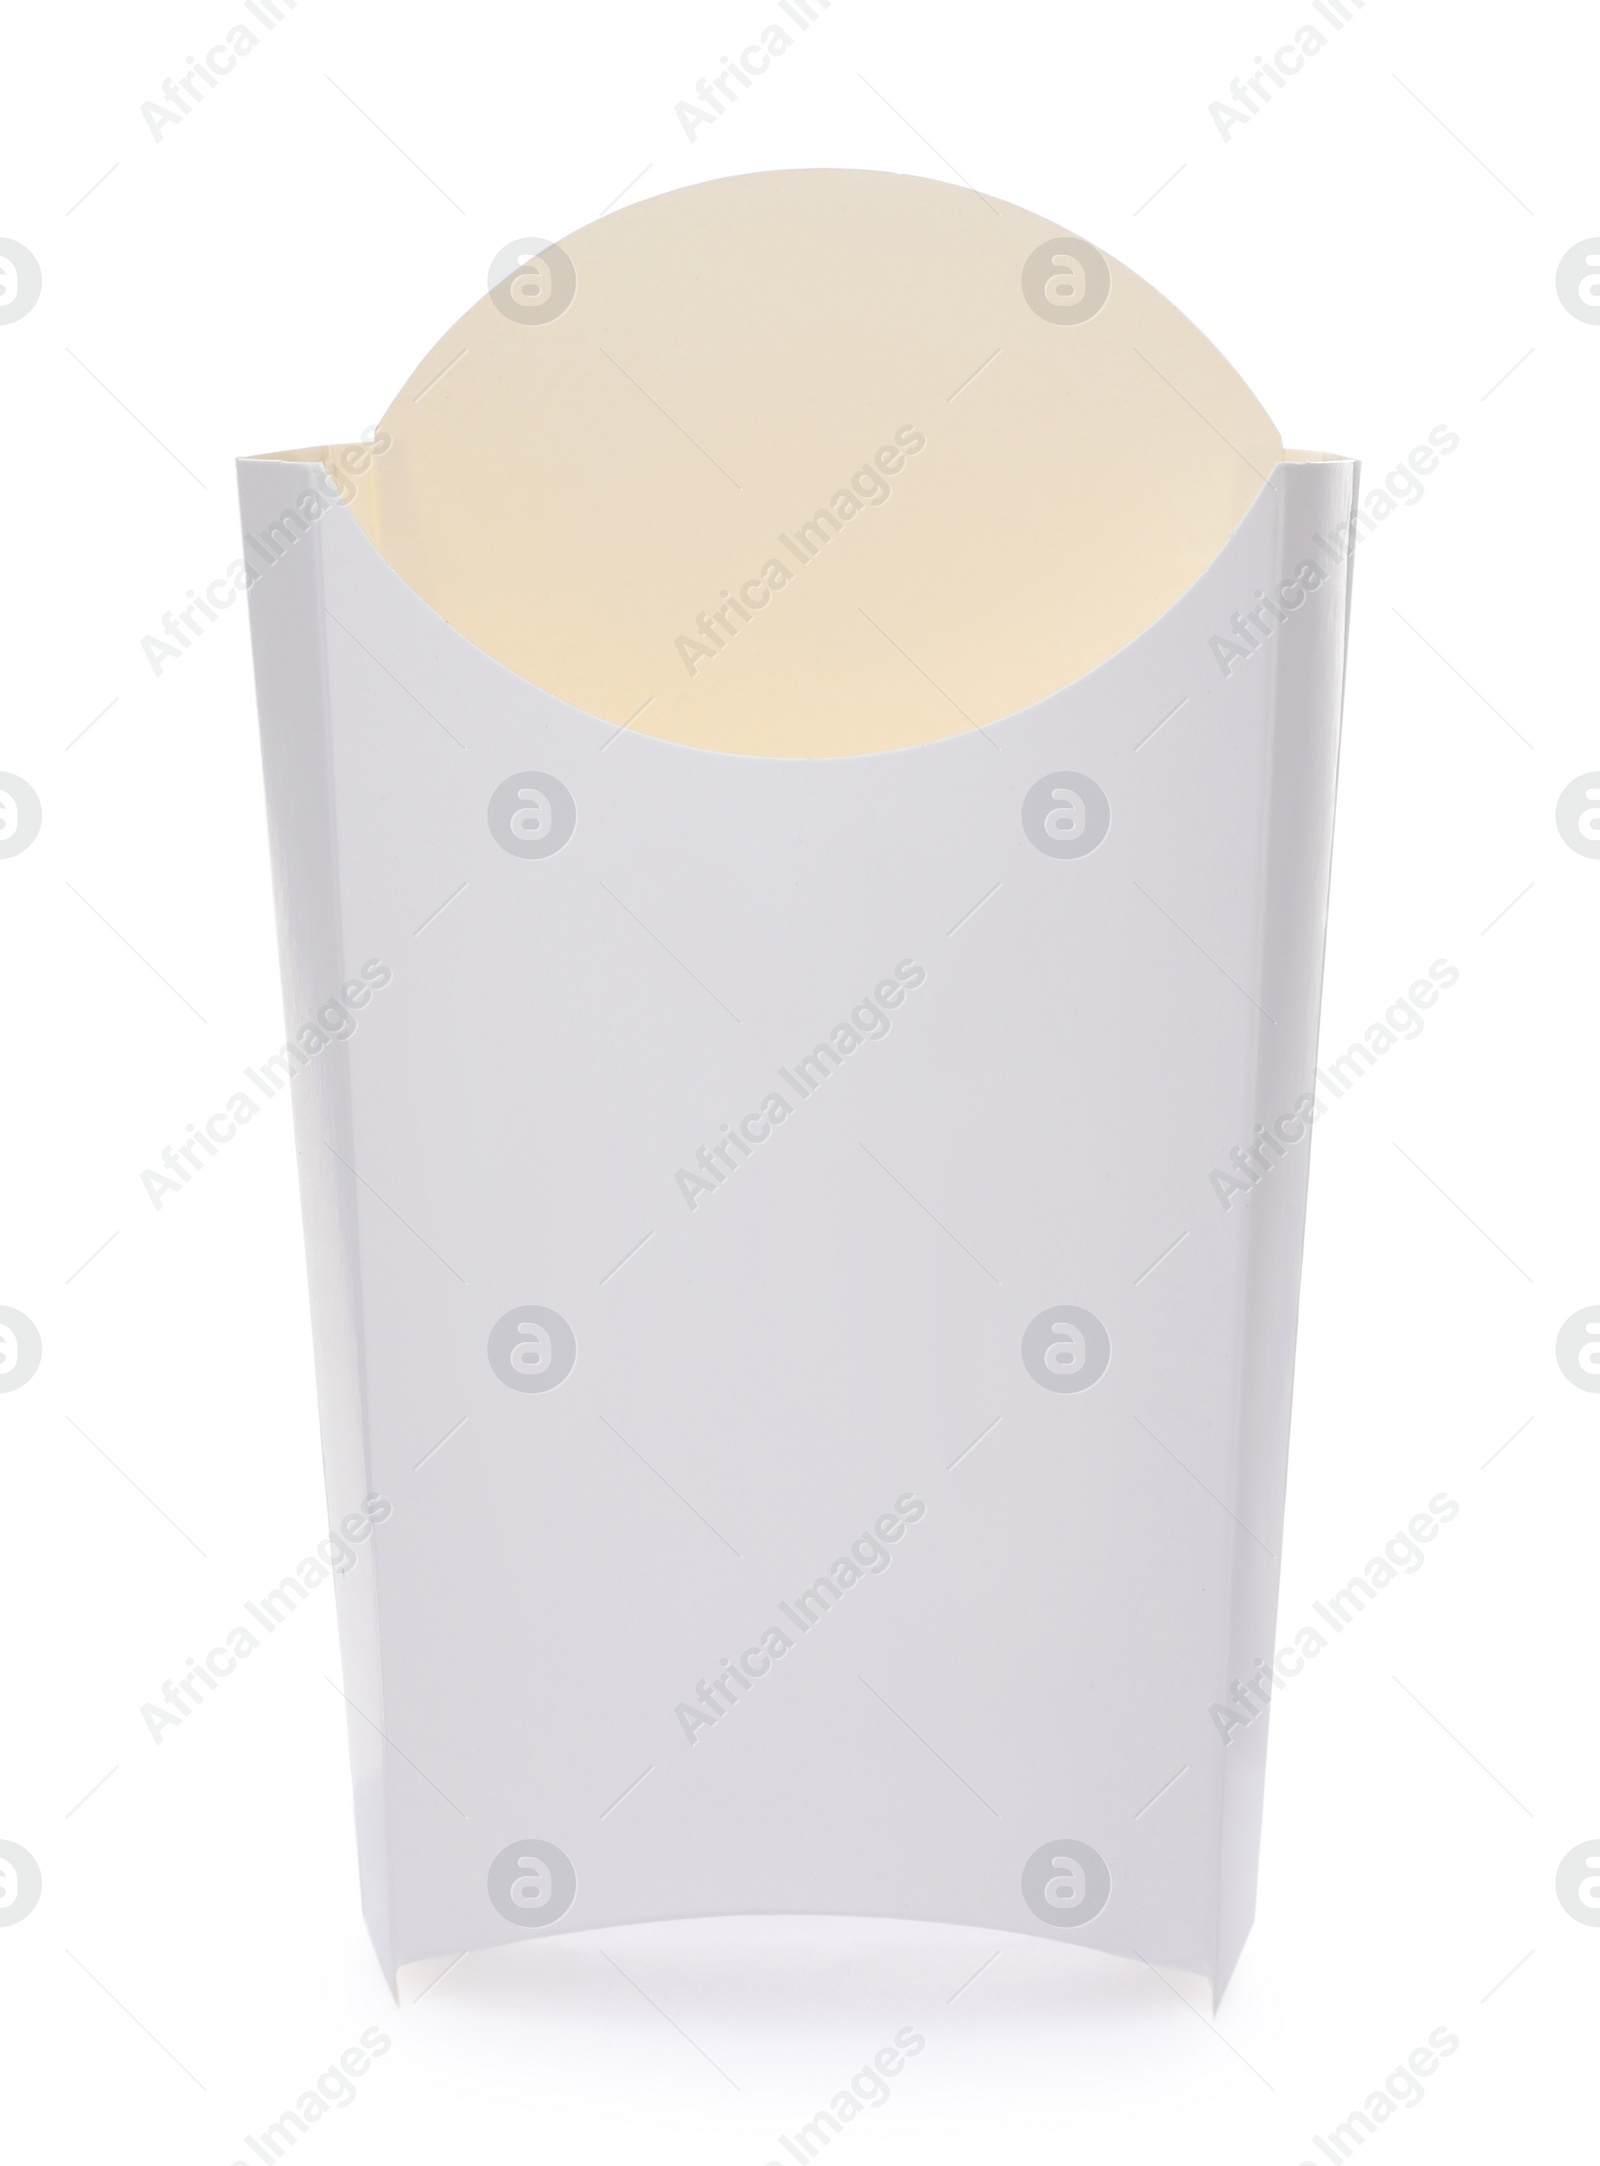 Photo of Empty paper bag on white background. Container for food